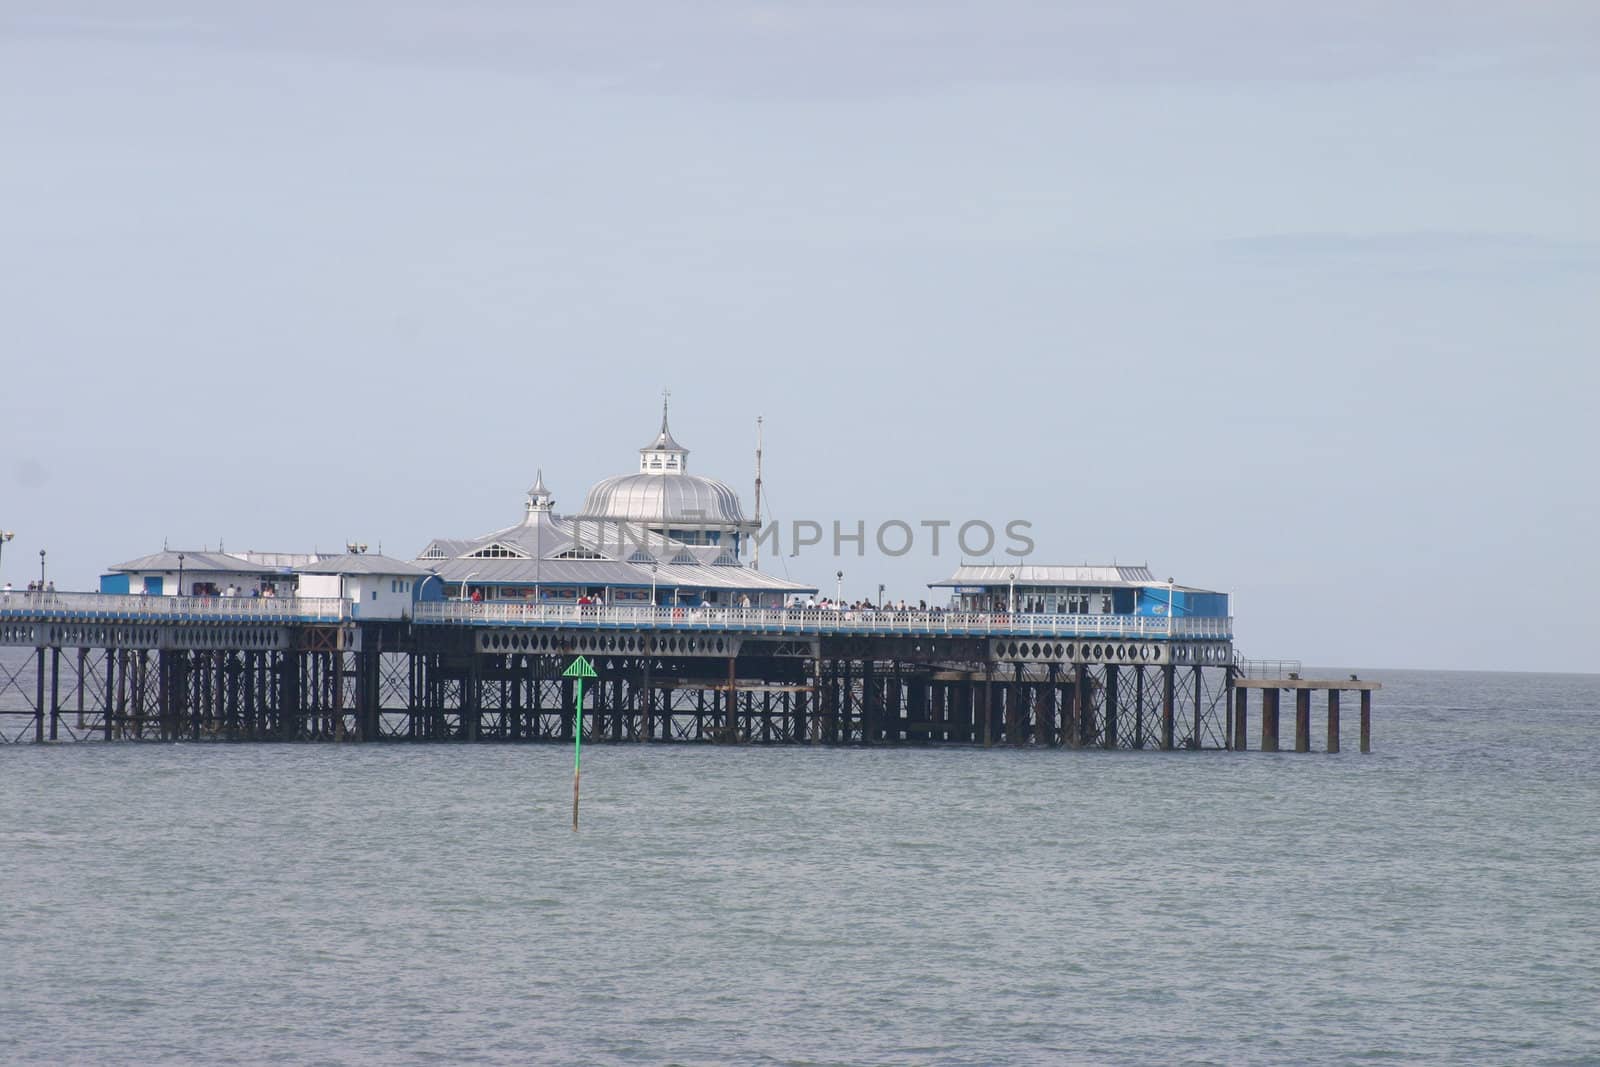 End of the Pier at Llandudno in North Wales